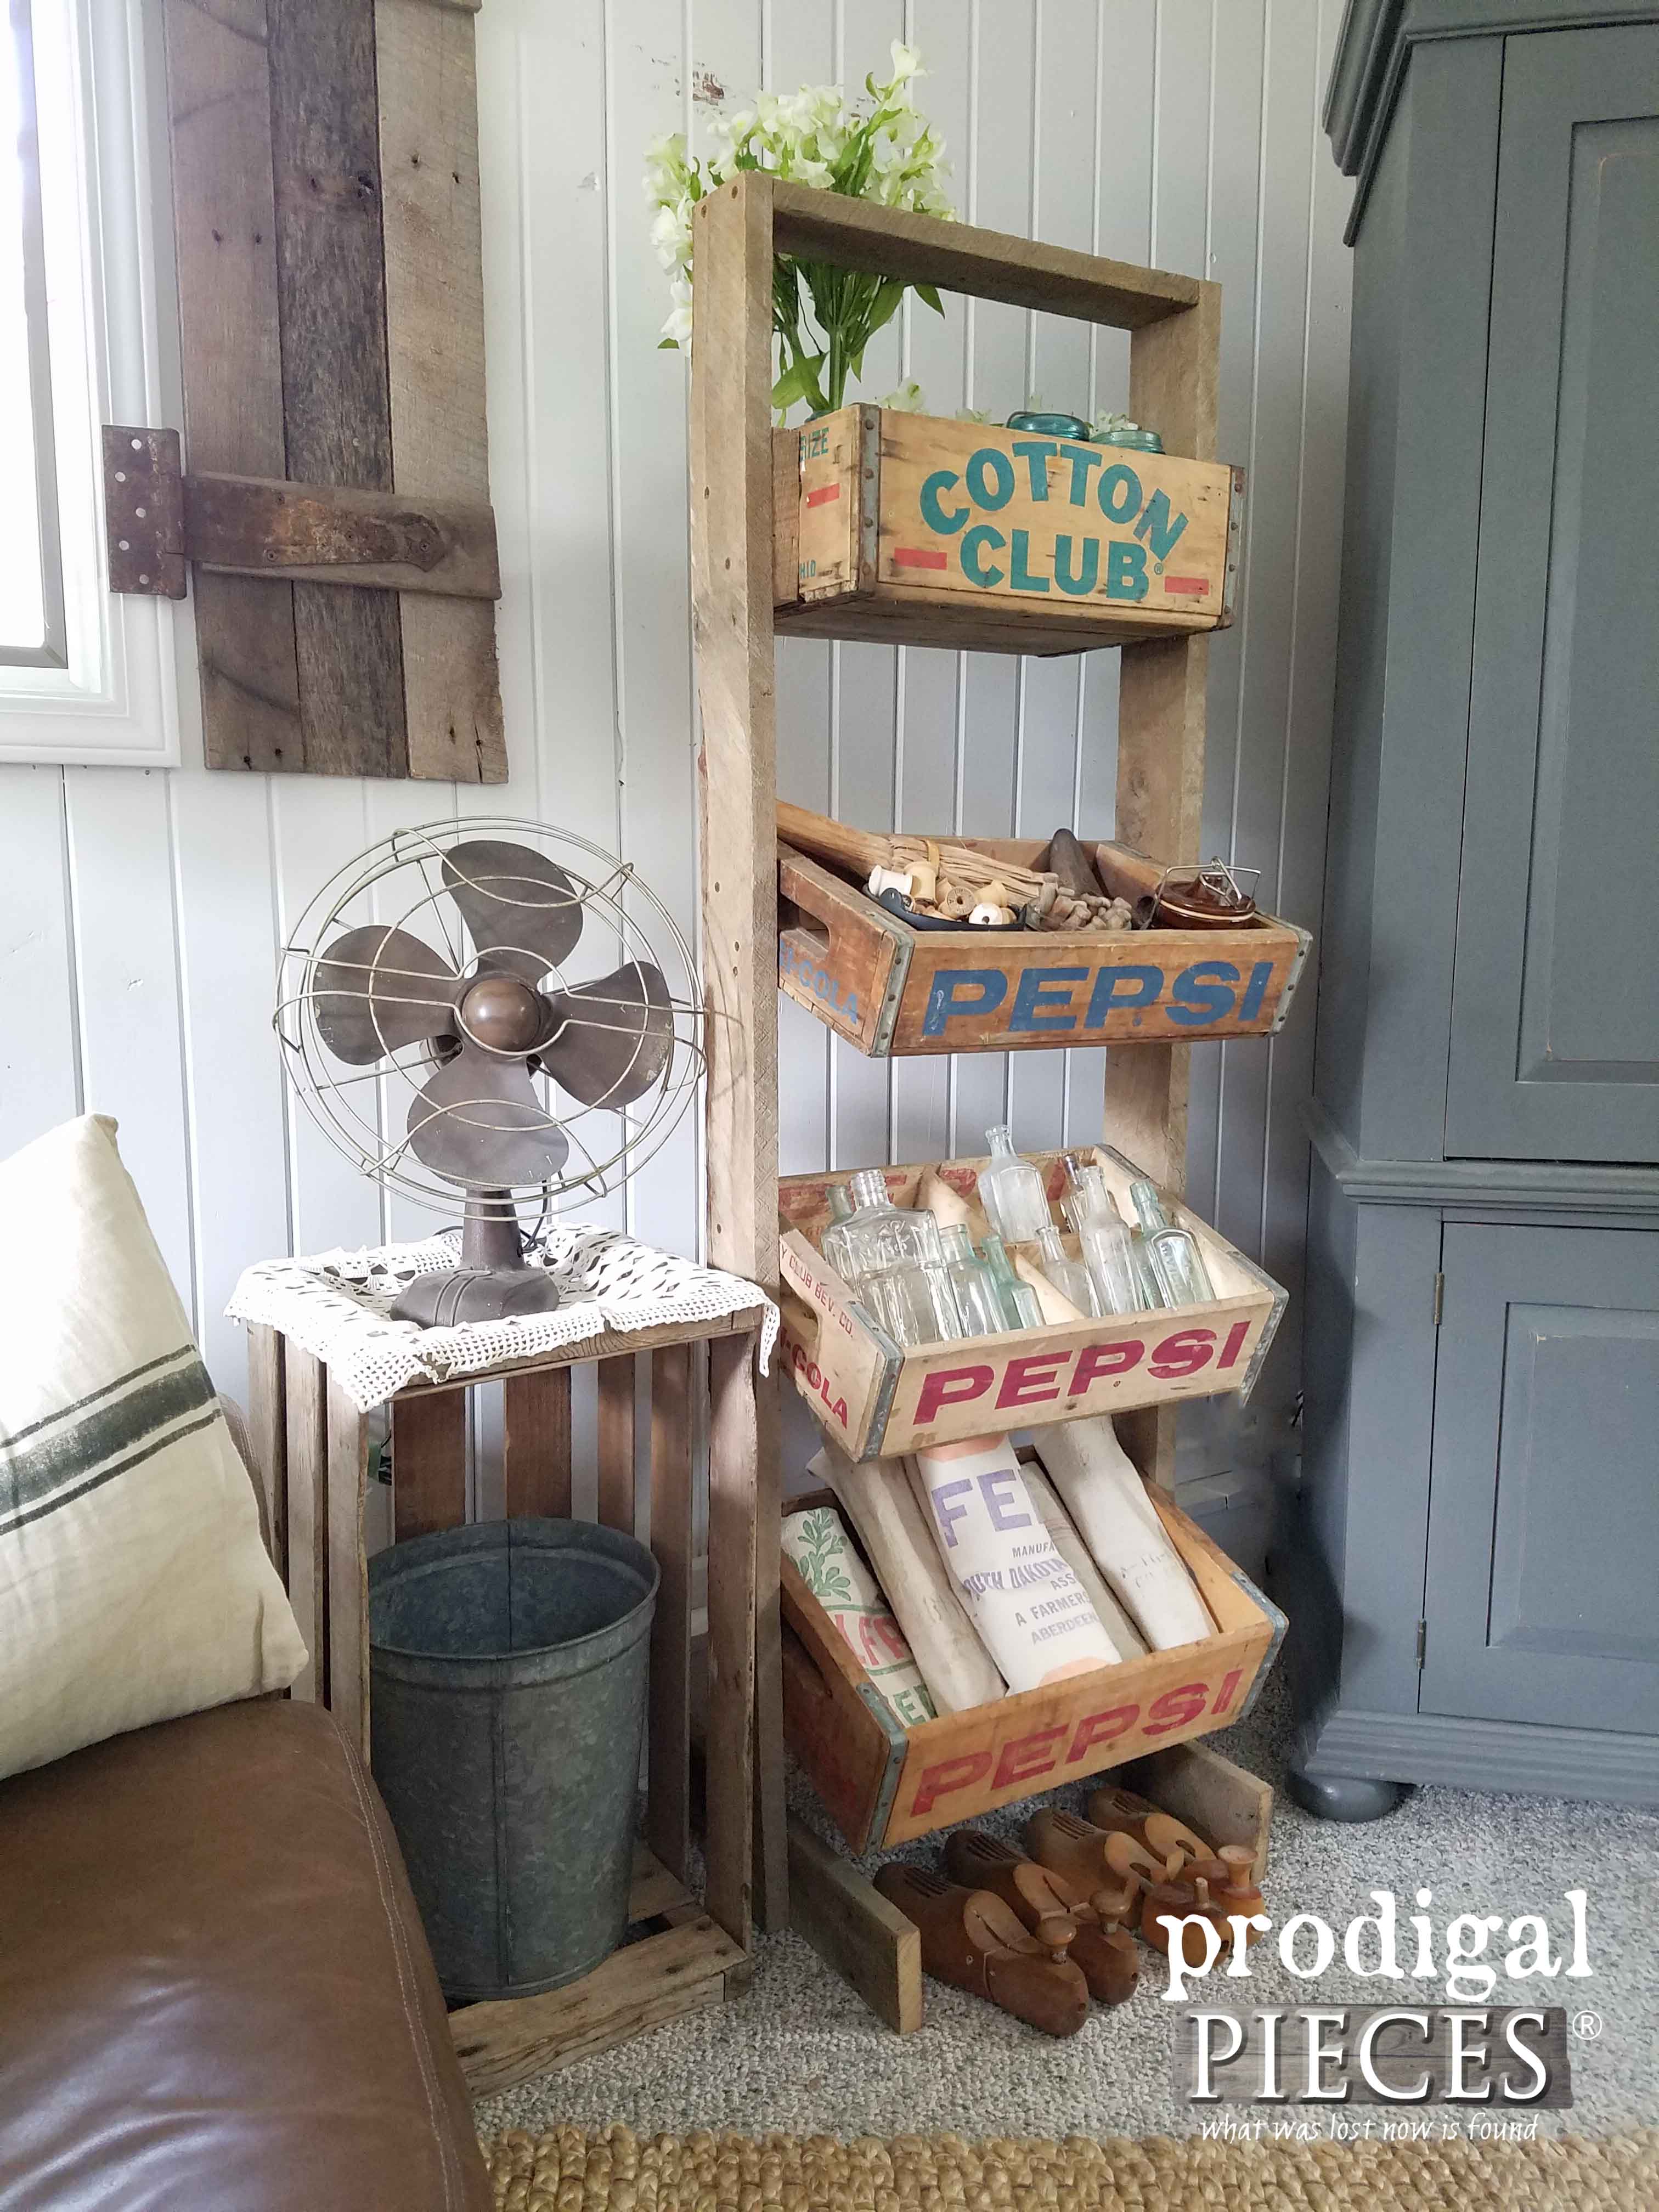 Rustic Soda Crate Stand Made with Reclaimed Barn Wood by Prodigal Pieces | www.prodigalpieces.com